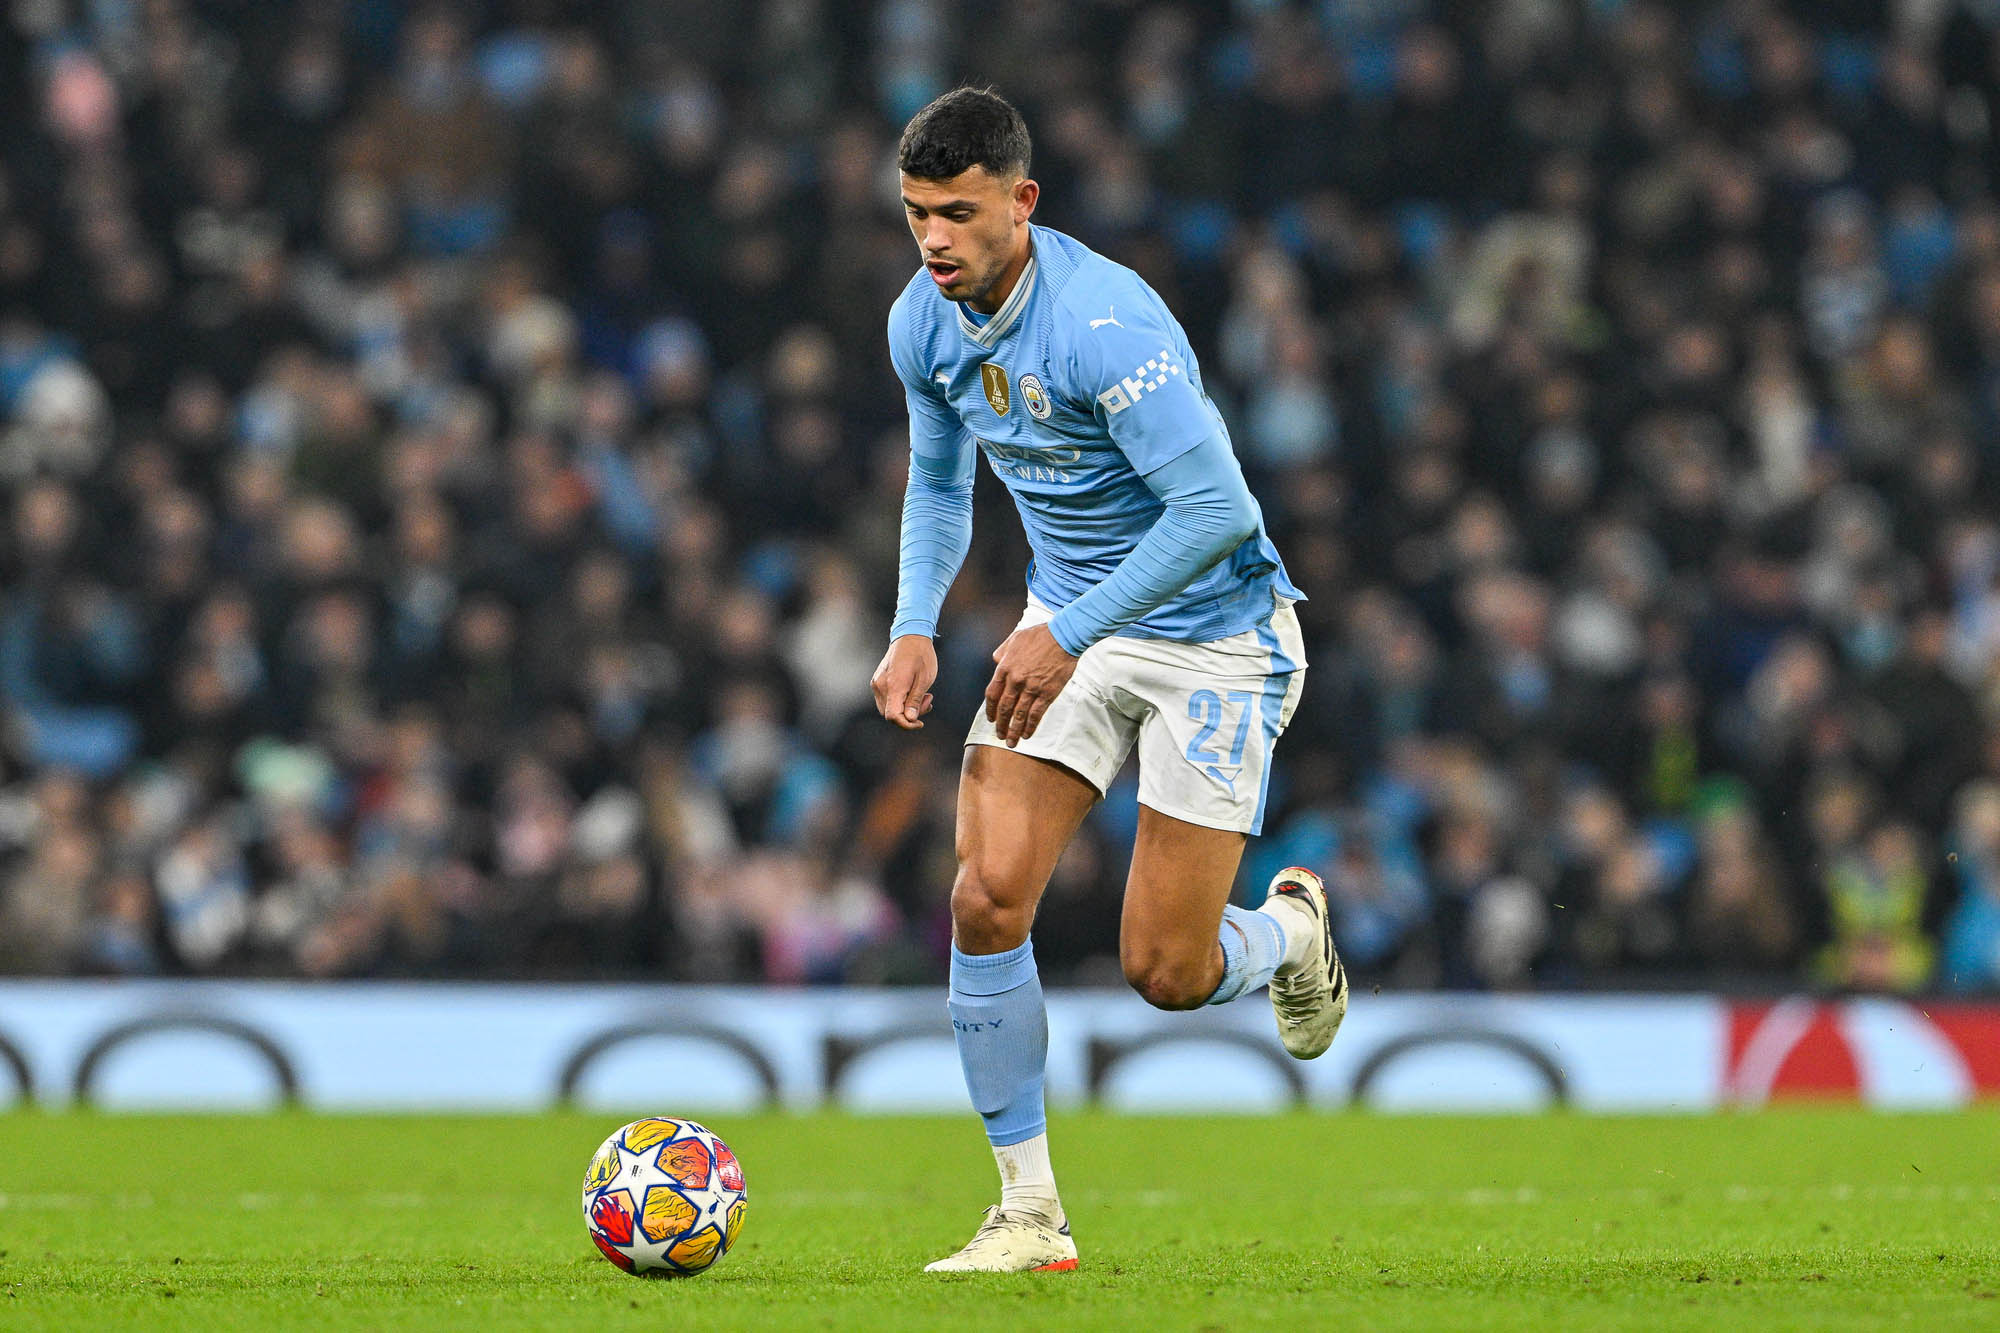 Matheus Nunes' career - Is he the next Phil Foden? Guardiola Seems to Think so